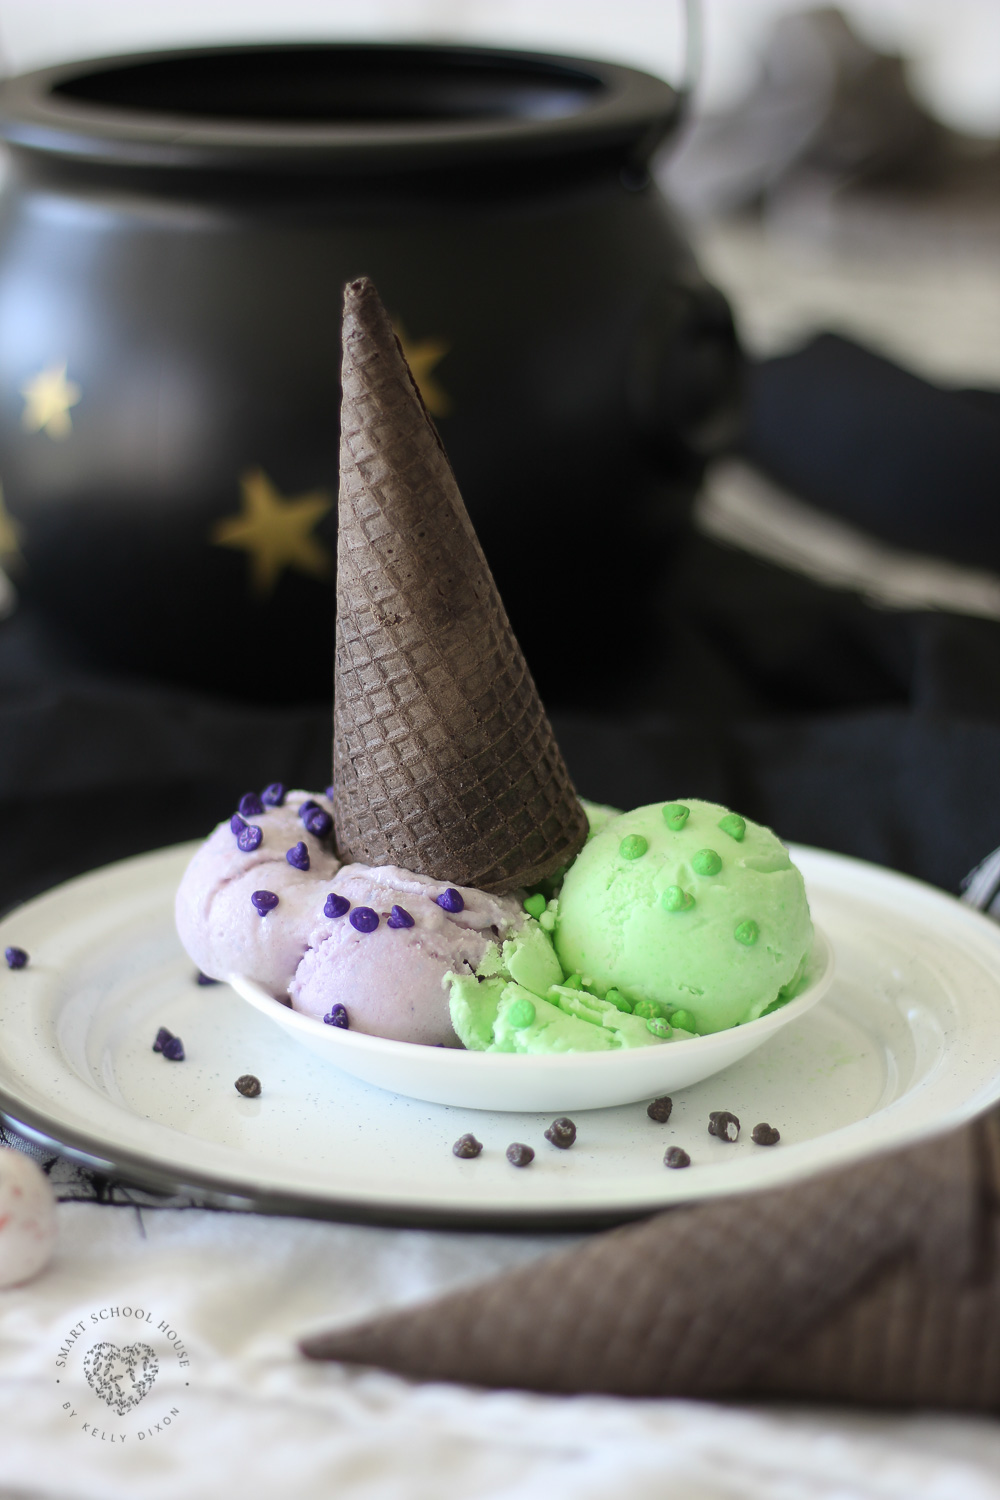 Halloween Ice Cream Made with Jello. The purple and green ice cream with the black cone reminds me of a witch! Fun and EASY dessert for Halloween. #Halloween #HalloweenFood #WitchIceCream #JelloIceCream #HalloweenDessert #Homemade 